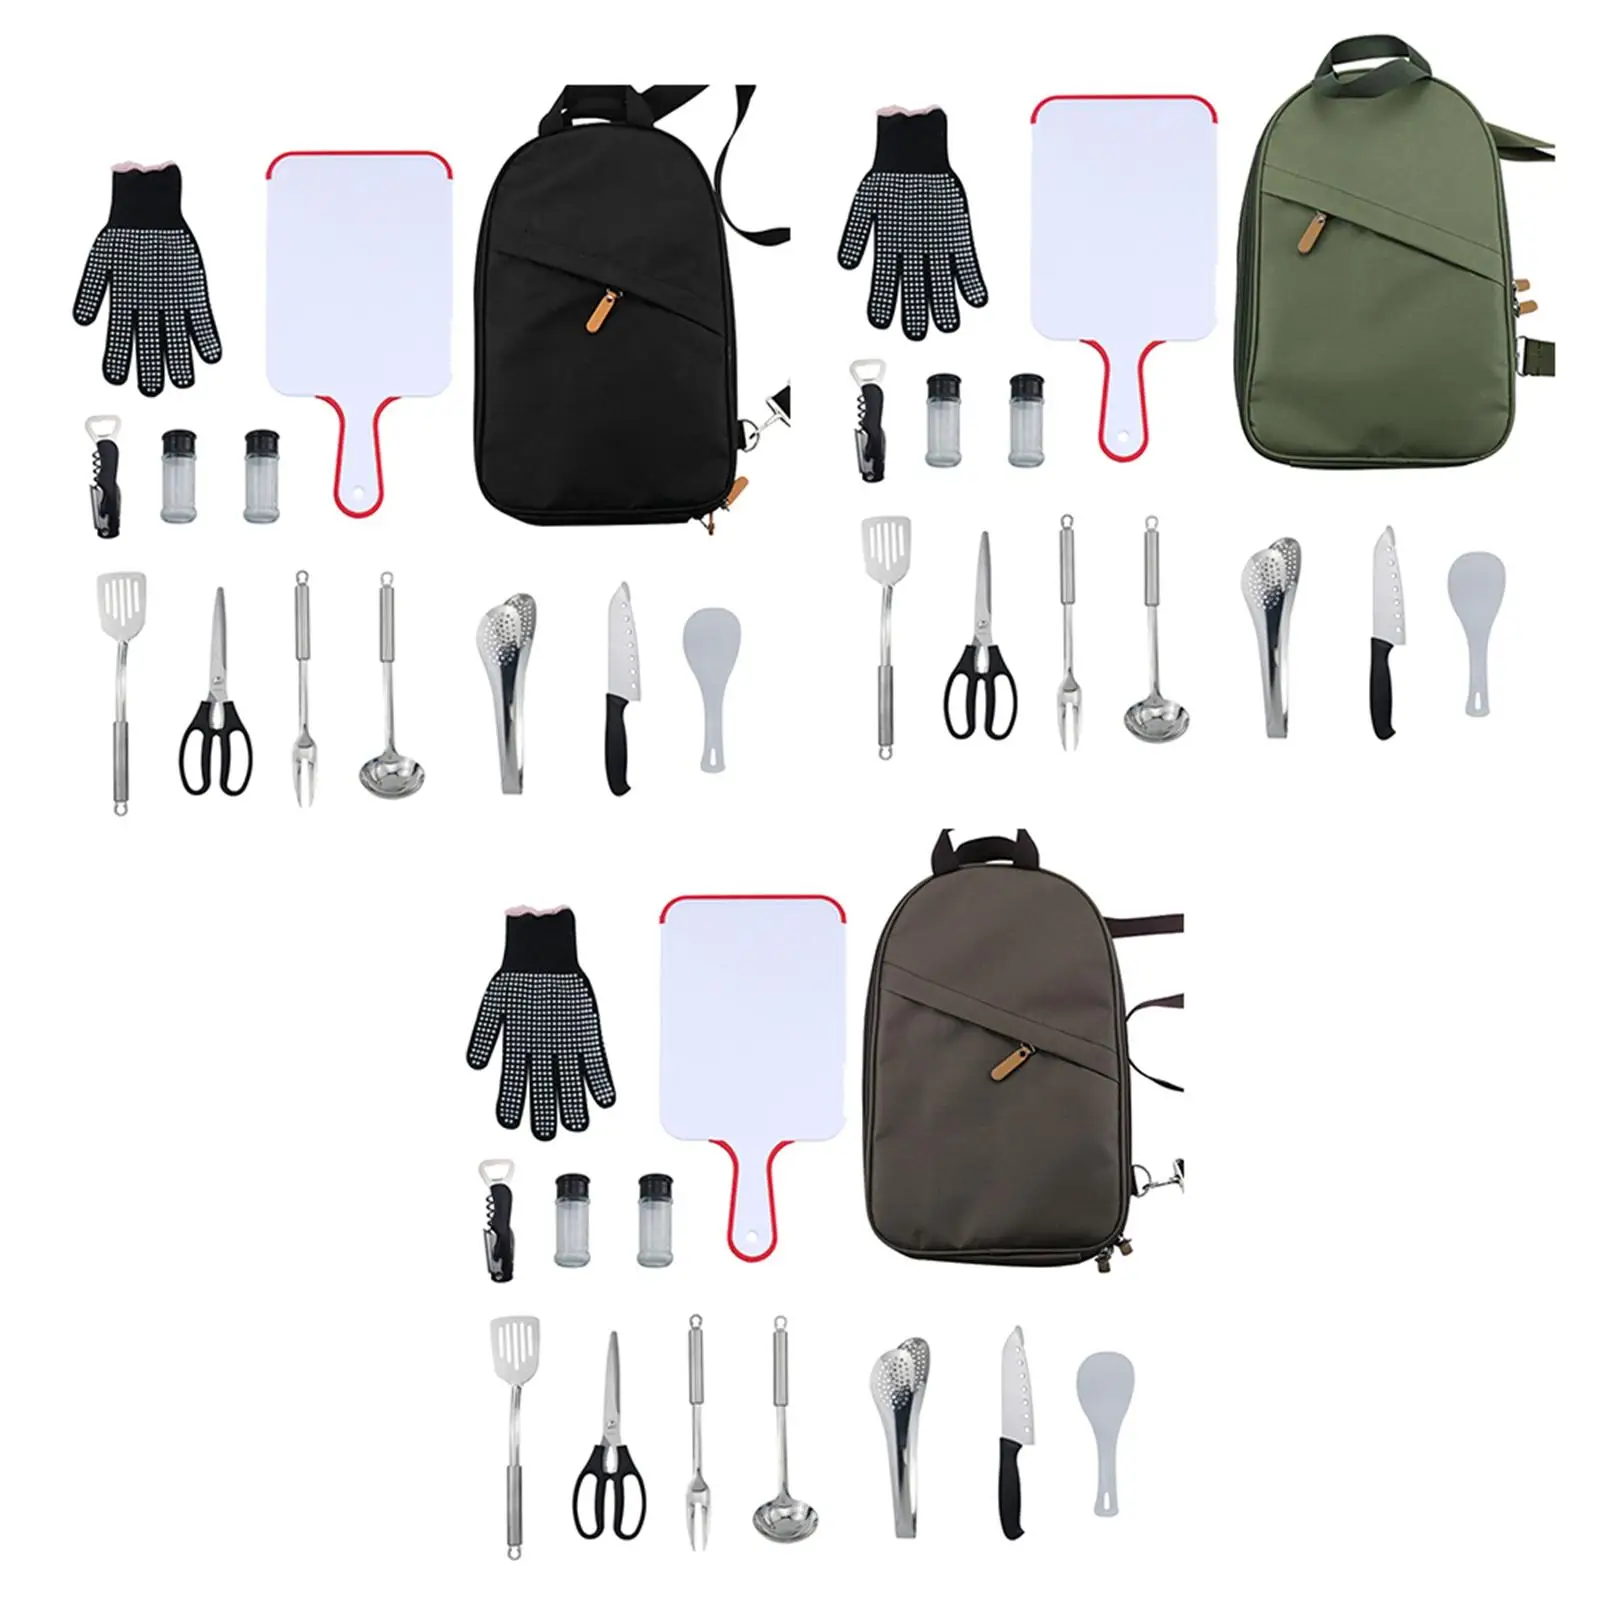 Portable Camping Kitchen Cooking Utensil Set 12 Pieces for Outdoor BBQ Backpacking Fishing